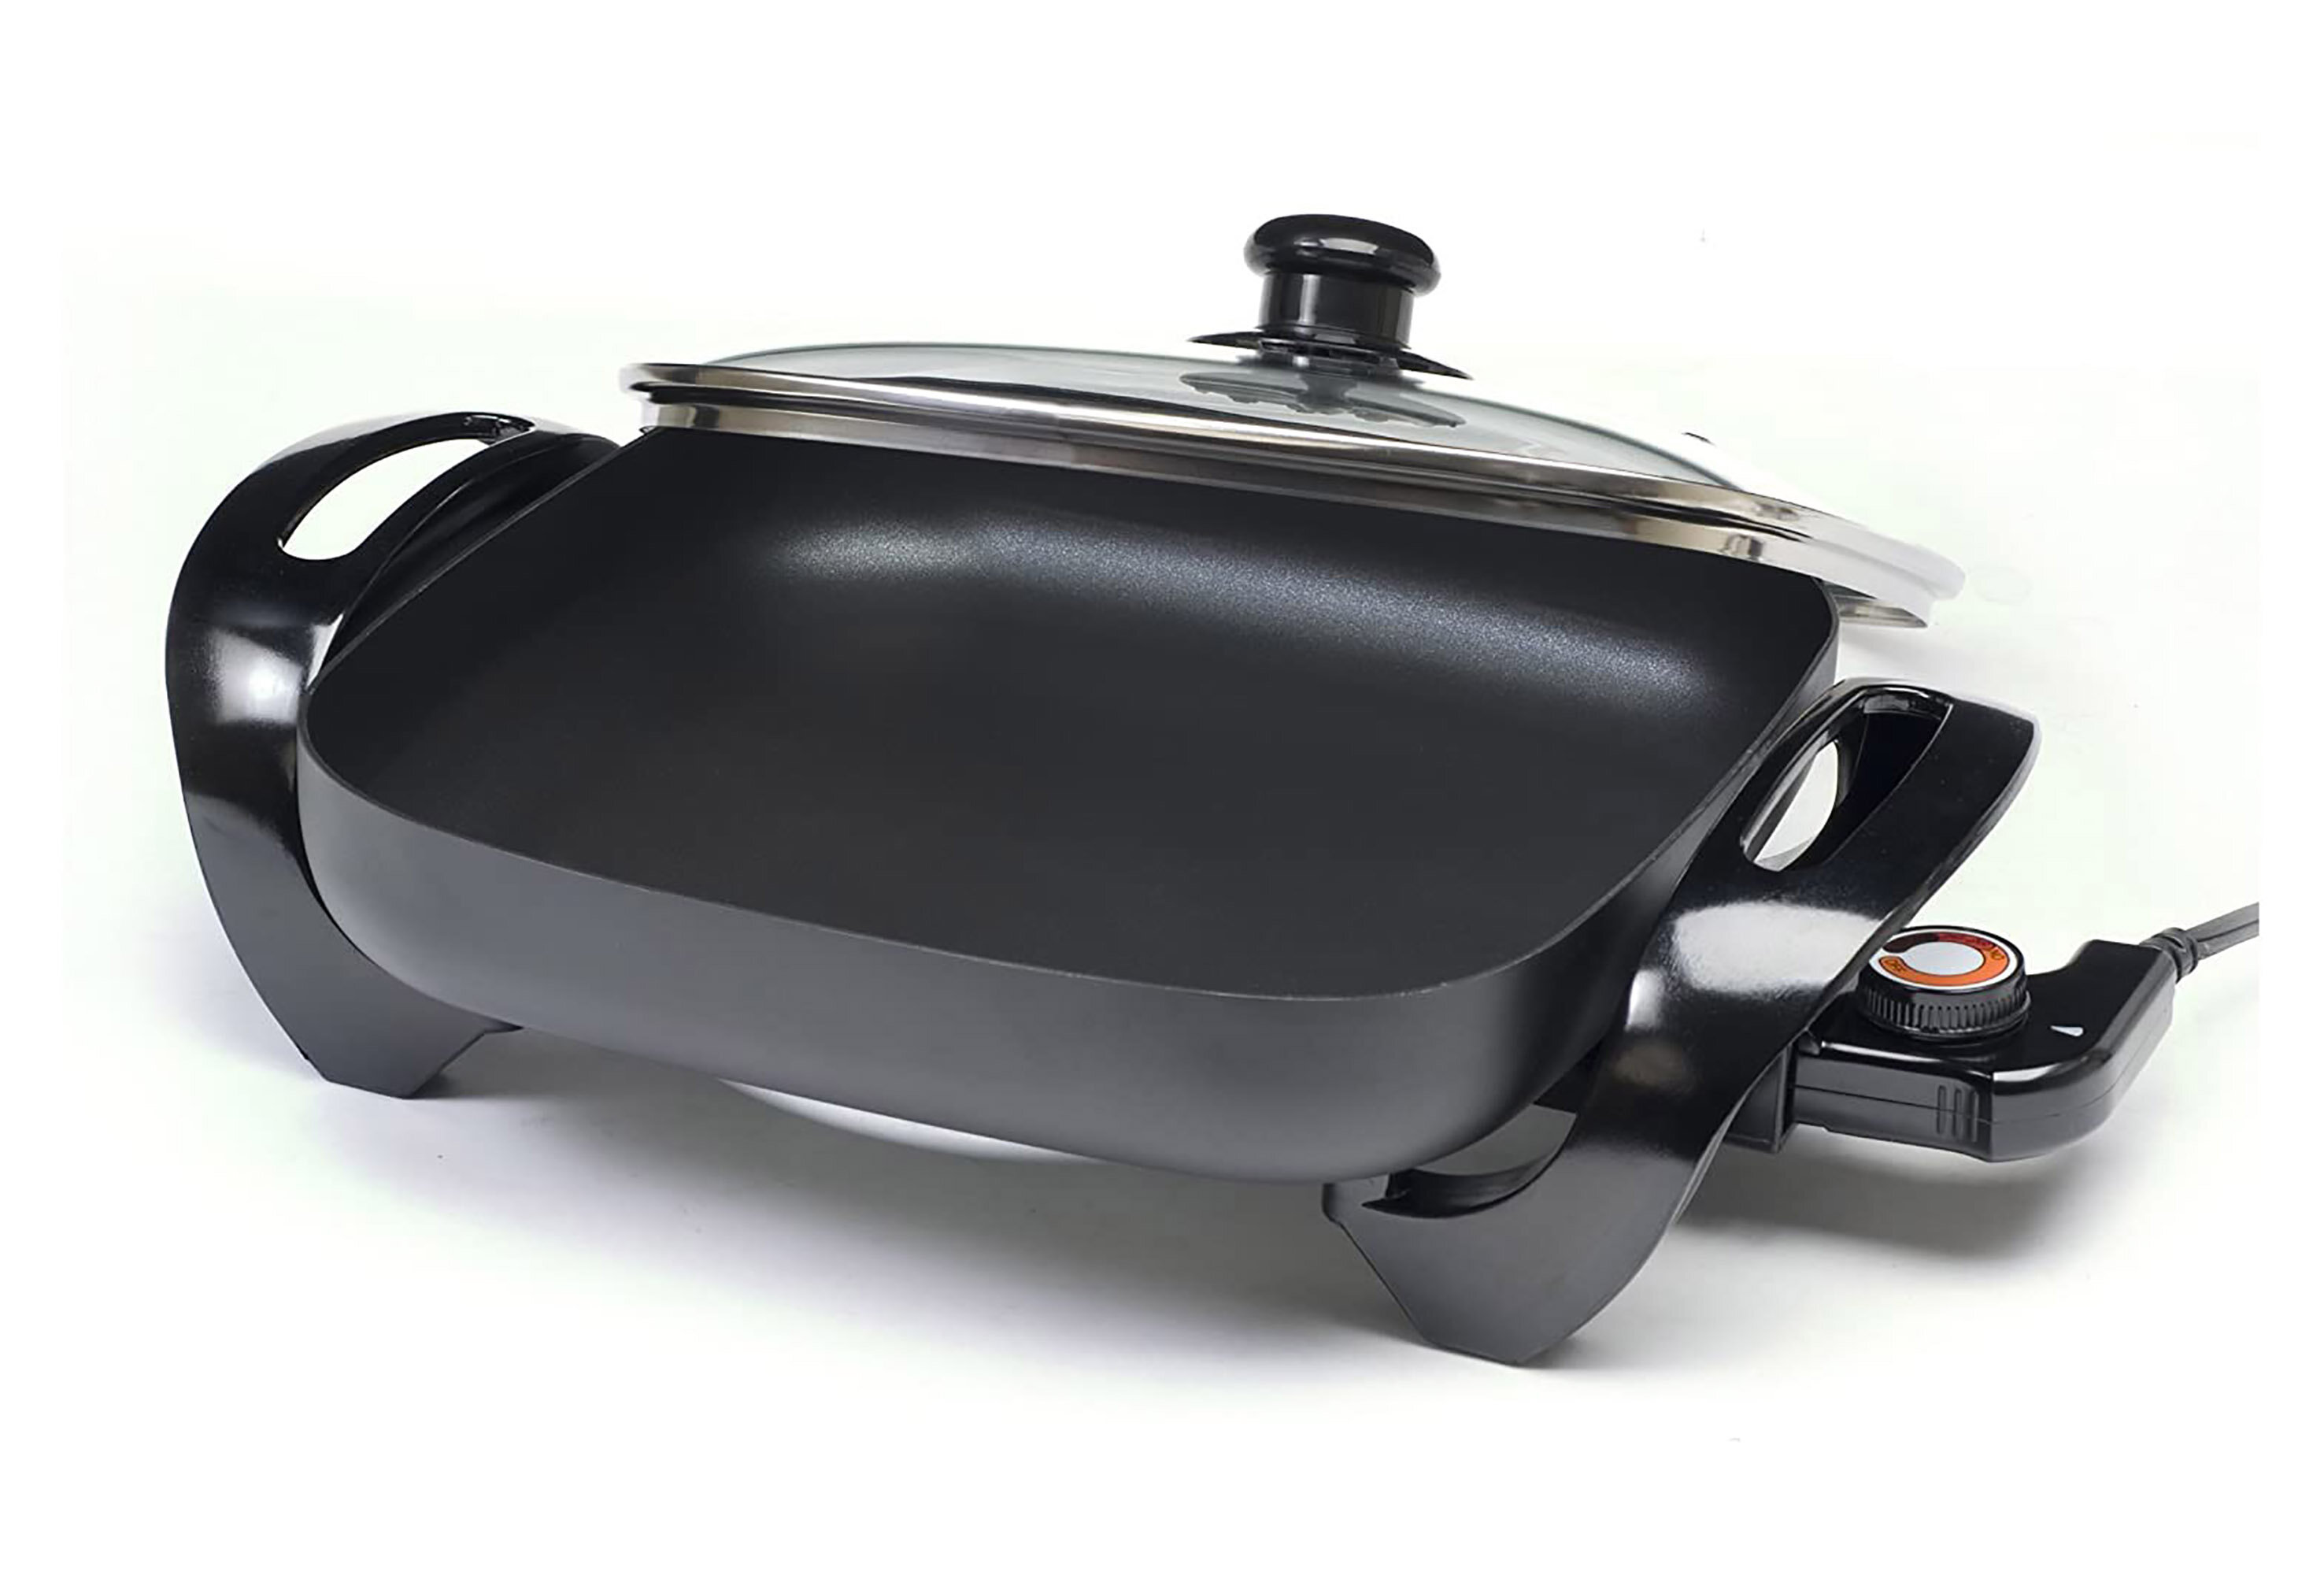 Elite by Maxi Matic Cuisine 7 Electric Skillet with Glass Lid